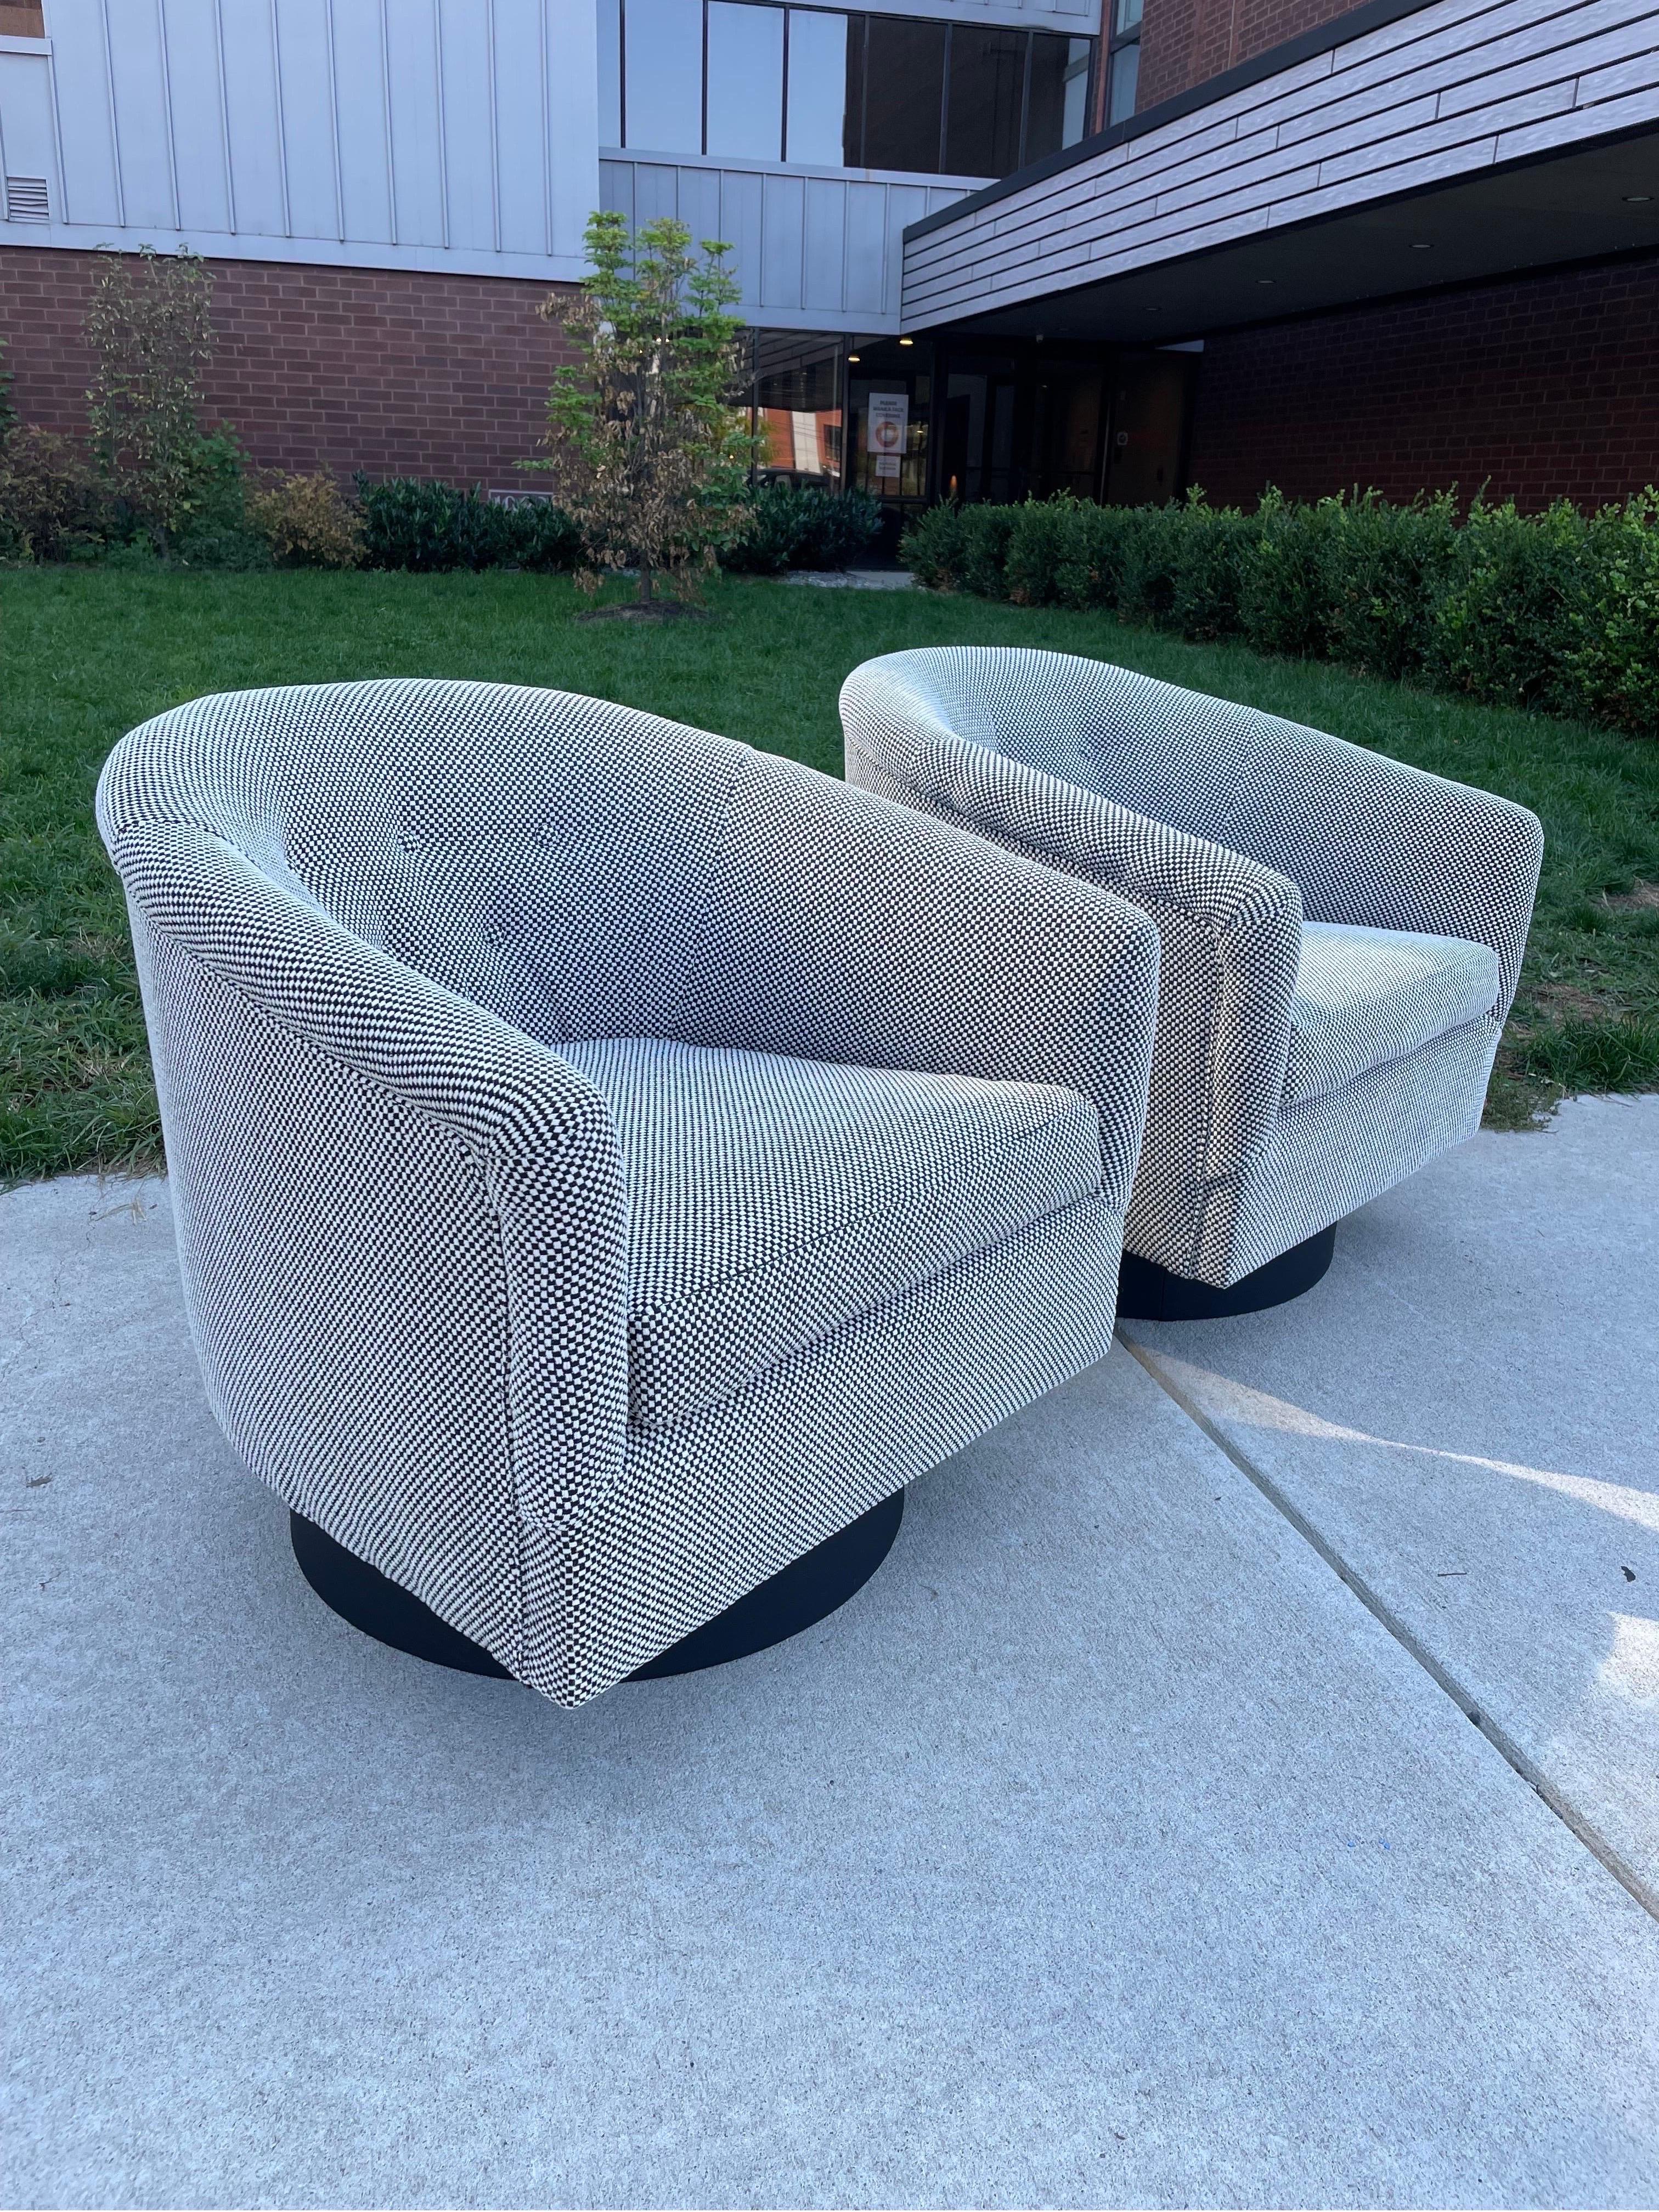 Newly reupholstered MCM swivel chairs by Milo Baughman.